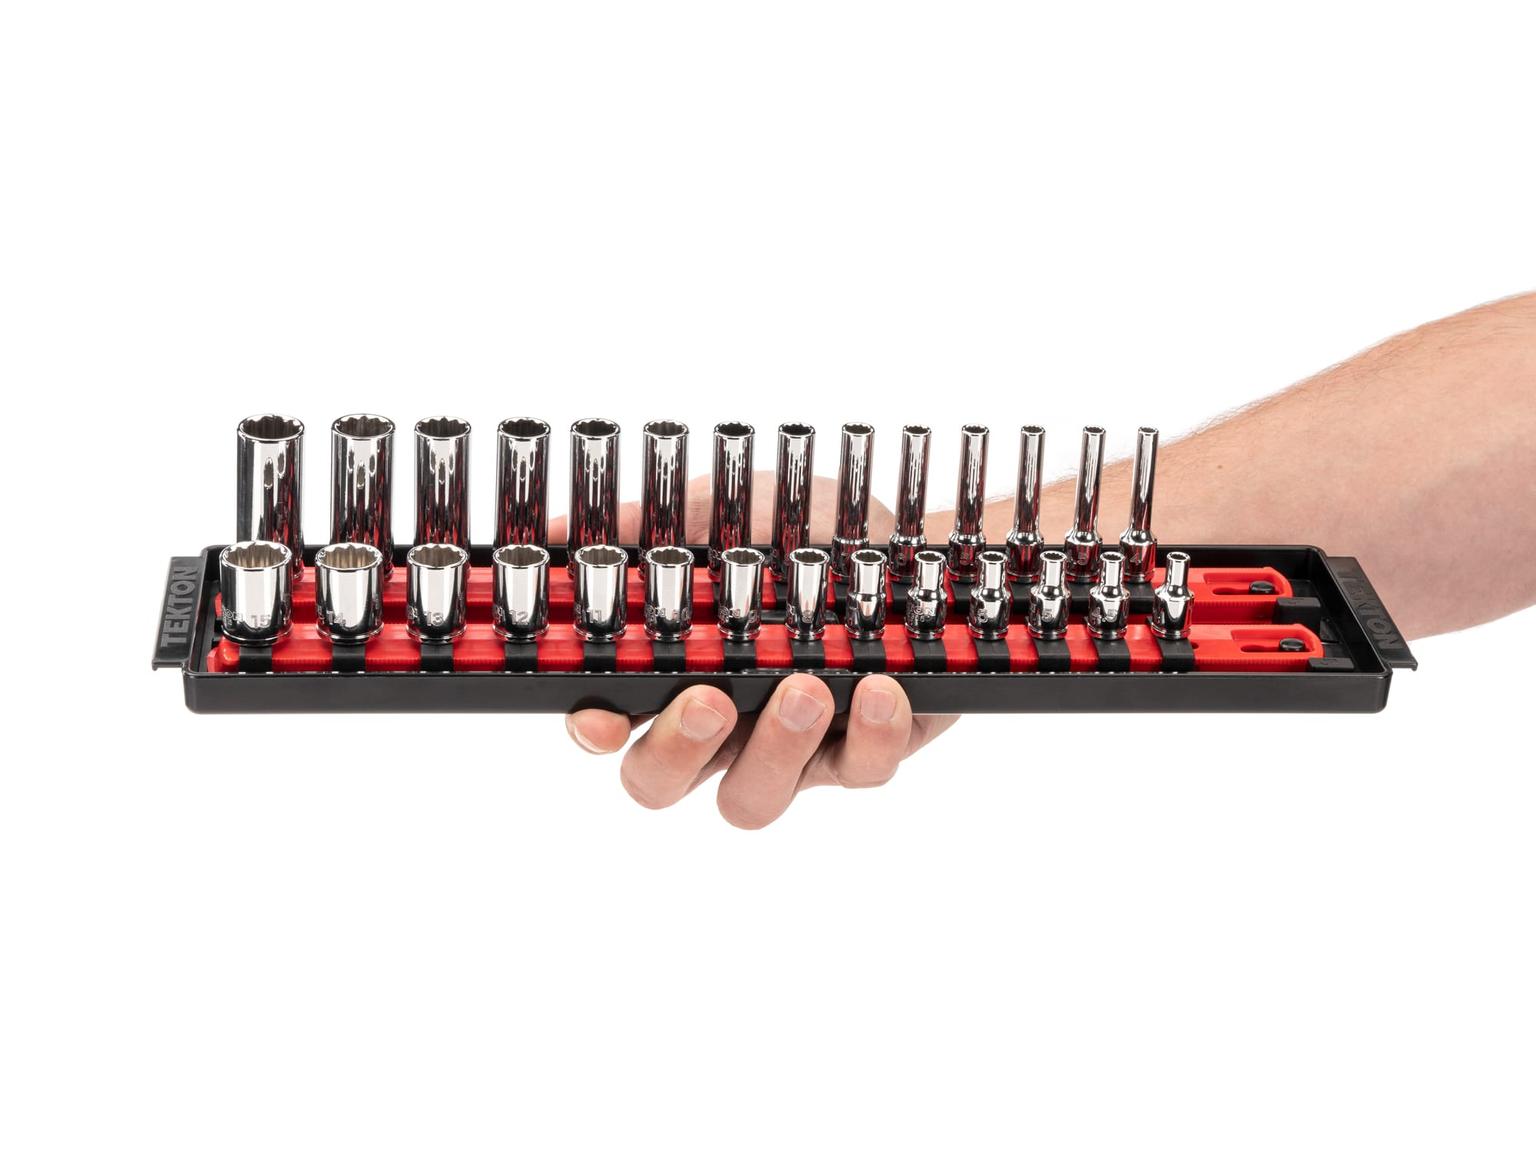 TEKTON SHD90216-T 1/4 Inch Drive 12-Point Socket Set with Rails, 50-Piece (5/32-9/16 in., 4-15 mm)